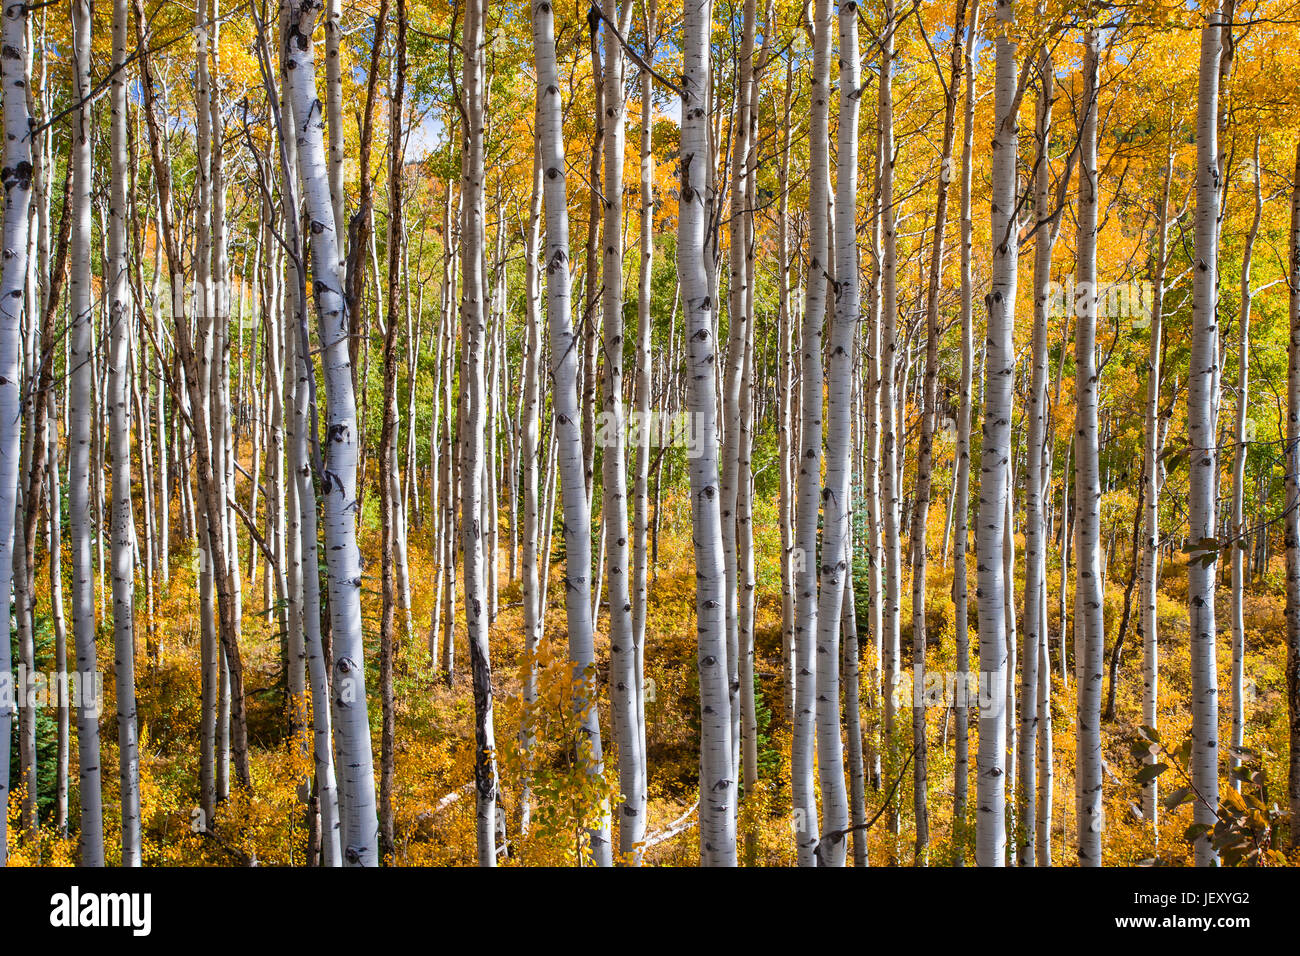 A forest of colorful aspen trees in fall. Stock Photo